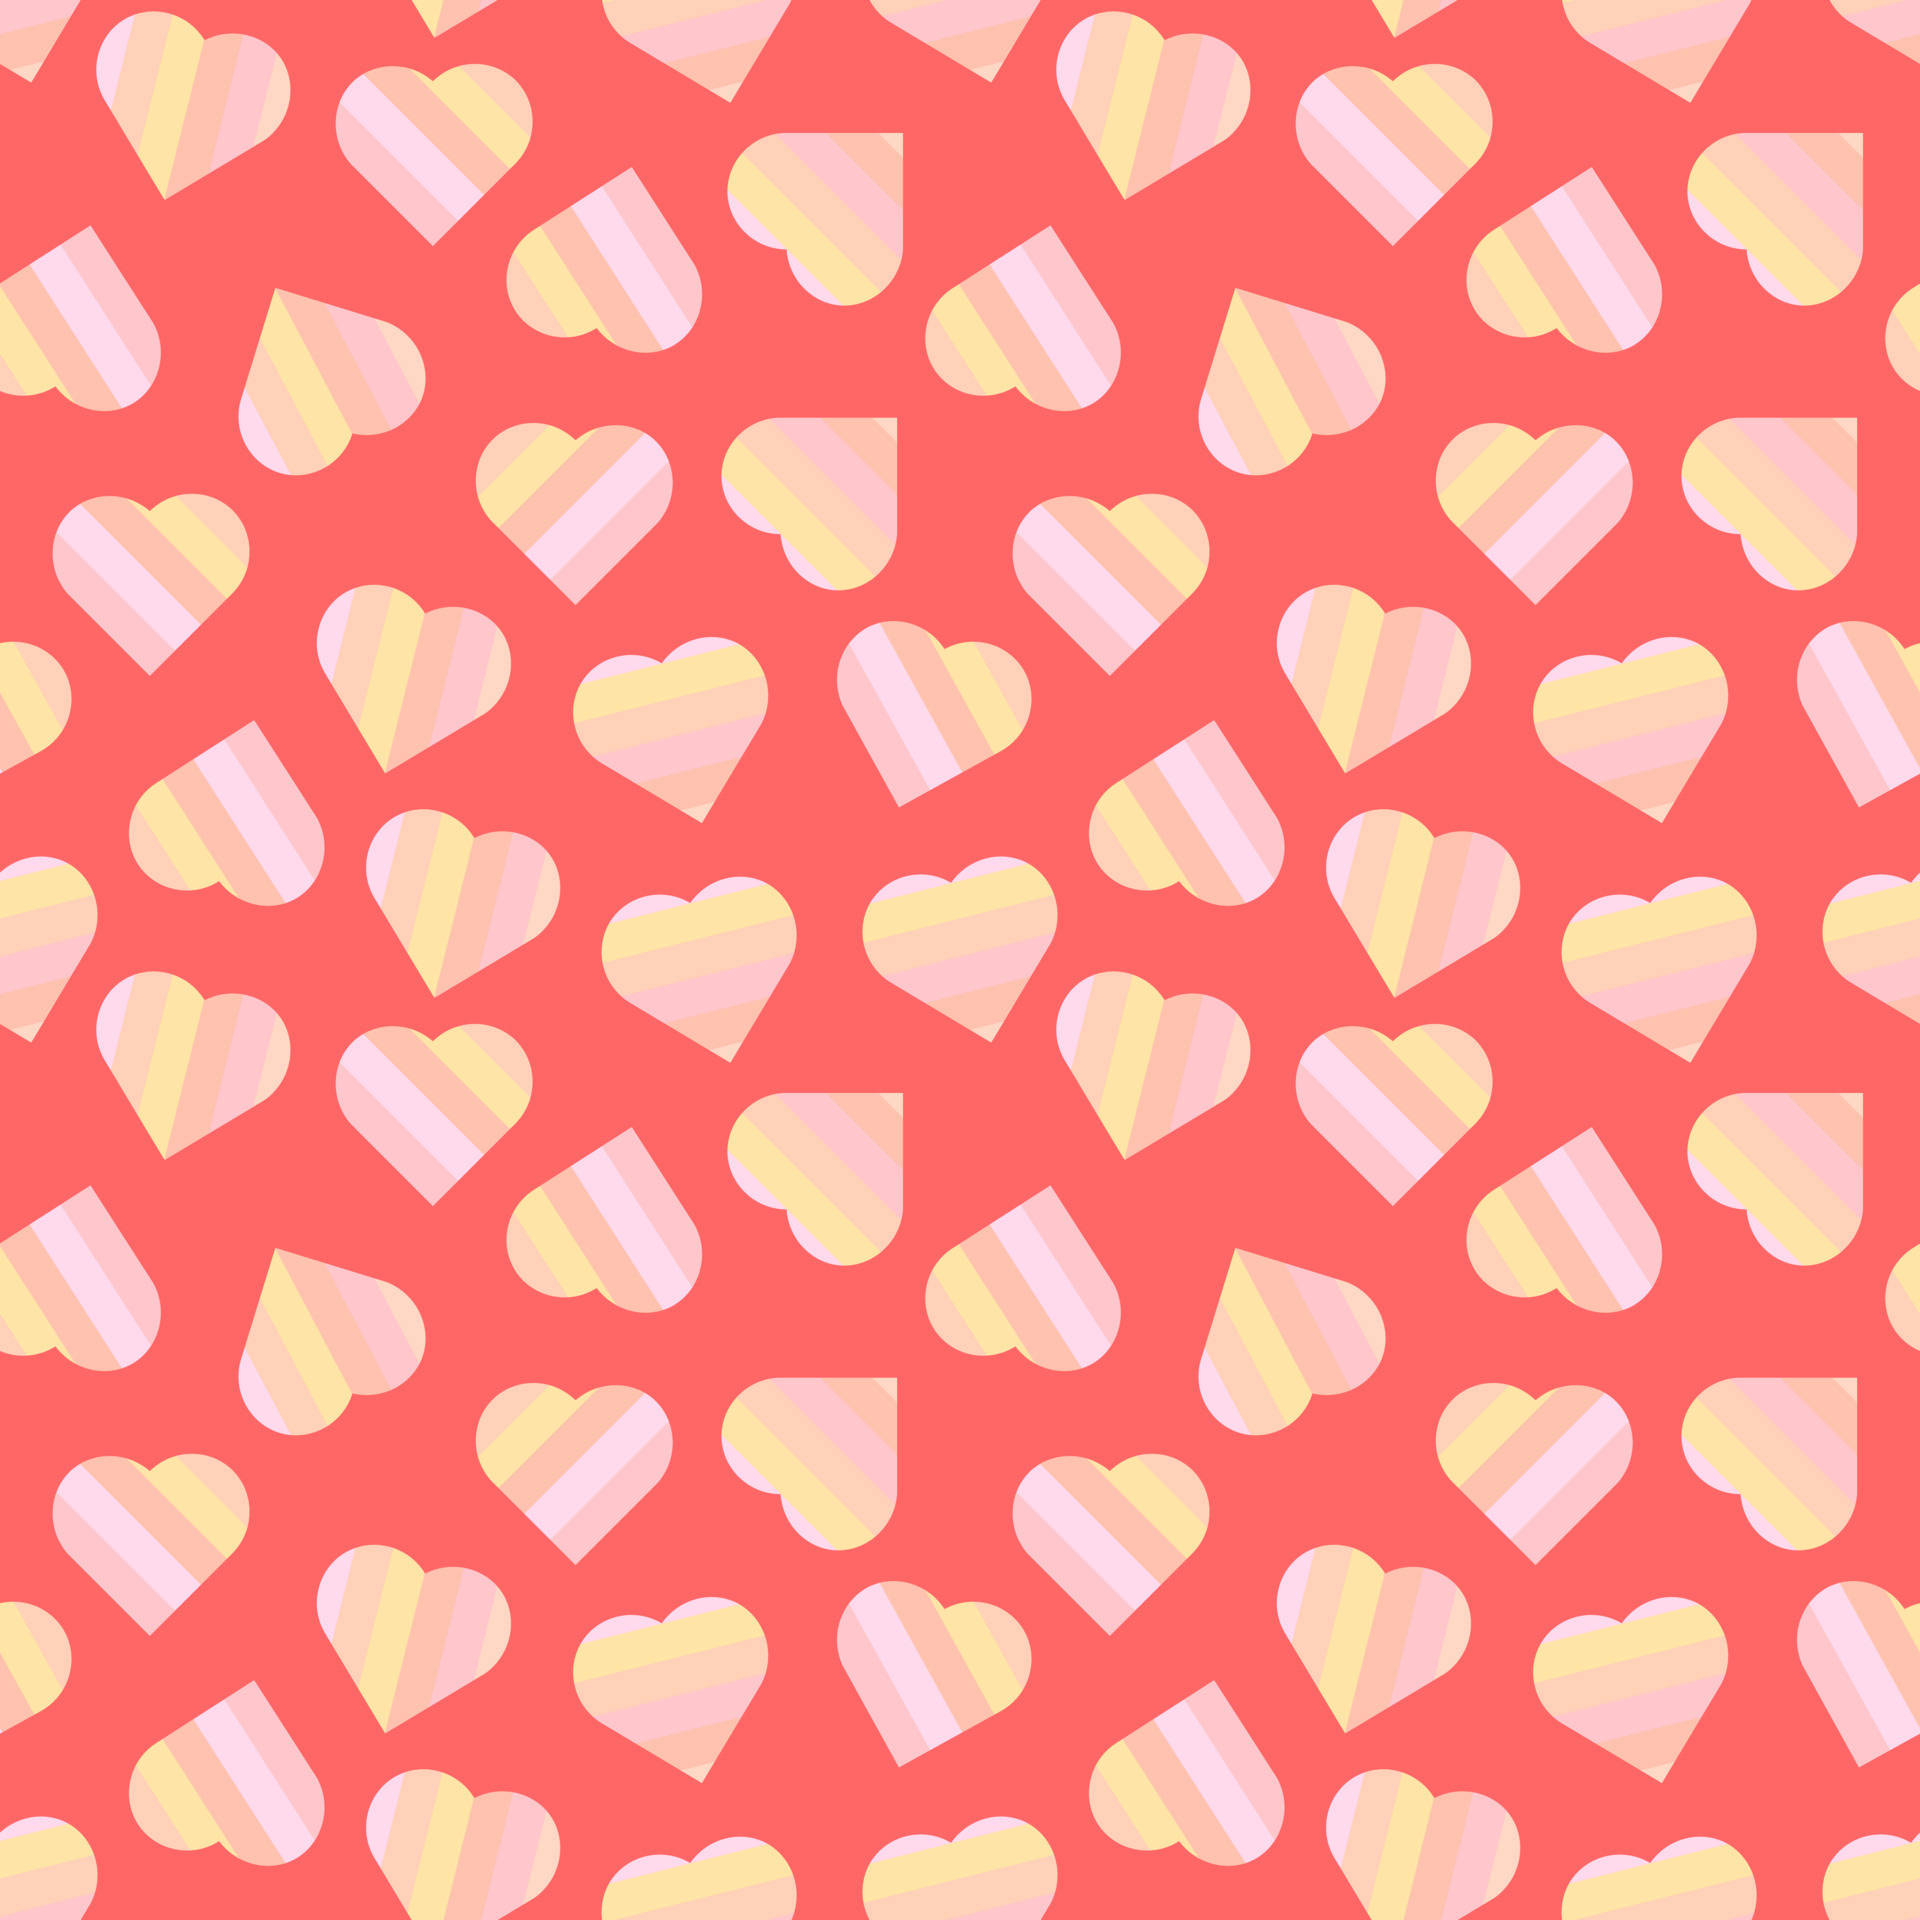 Spread love and joy this Valentines Day! Wallpaper